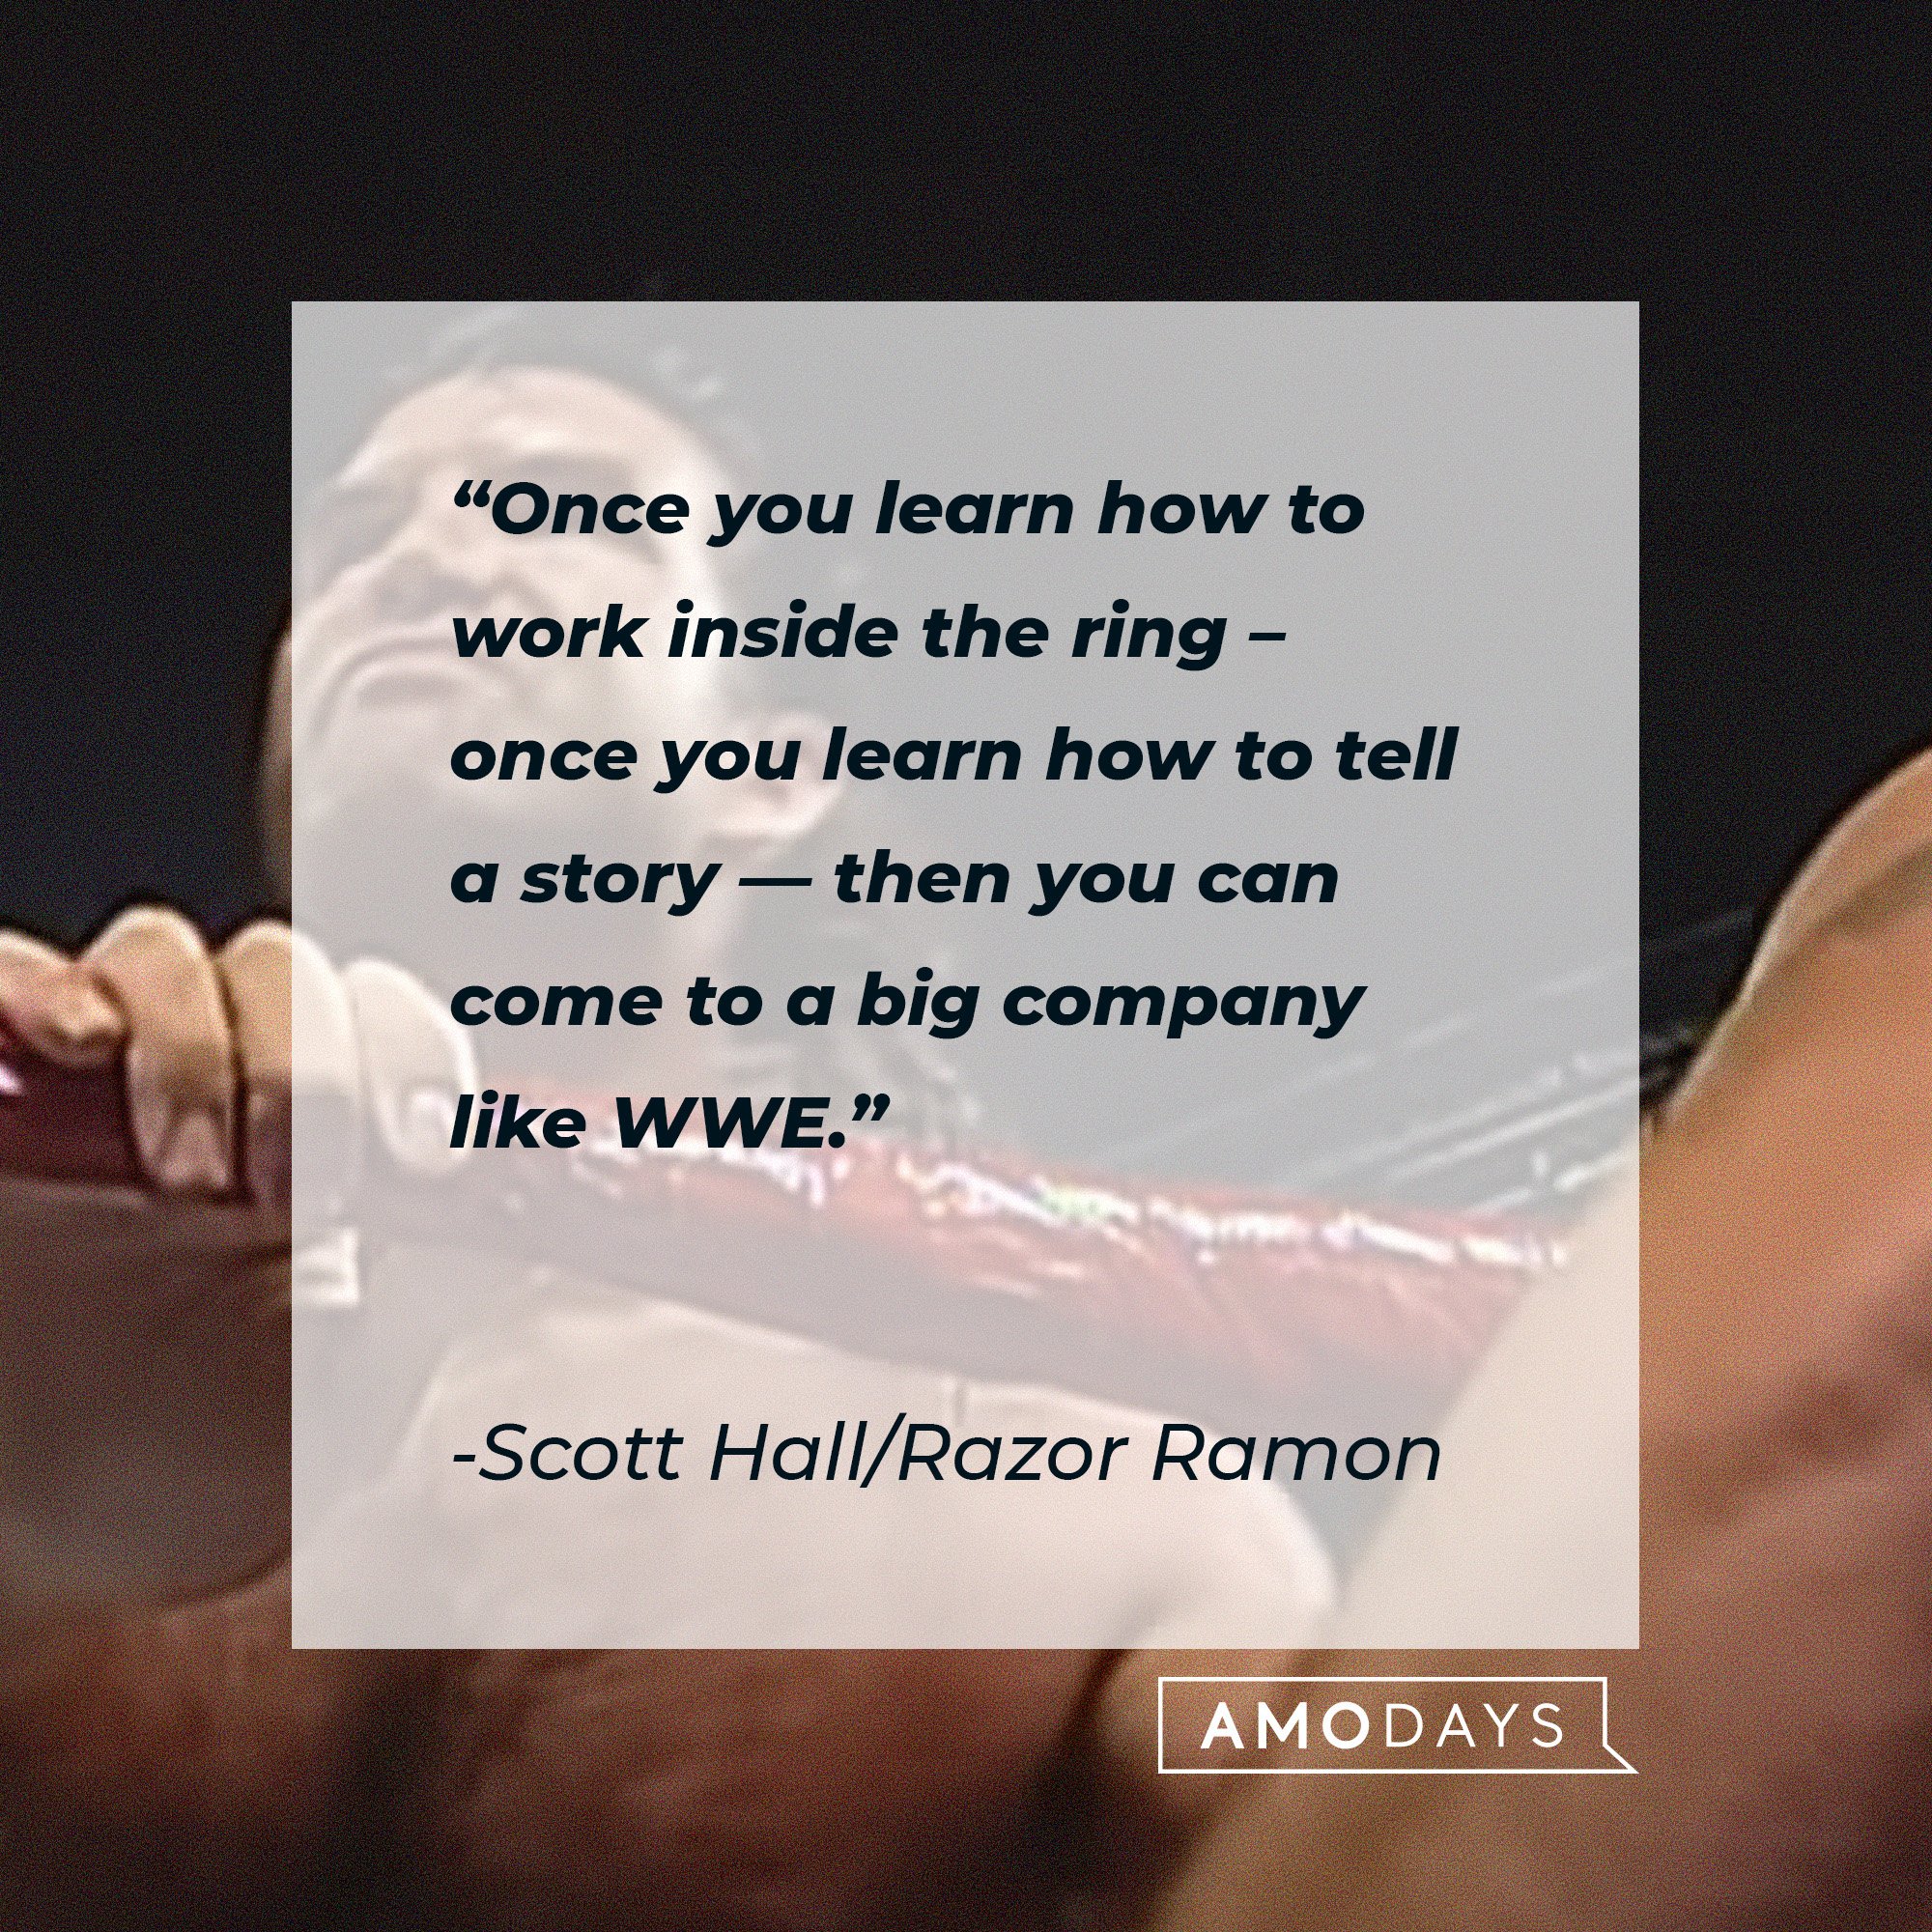 Scott Hall/Razor Ramon’s quote: "Once you learn how to work inside the ring – once you learn how to tell a story – then you can come to a big company like the WWE” | Image: AmoDays